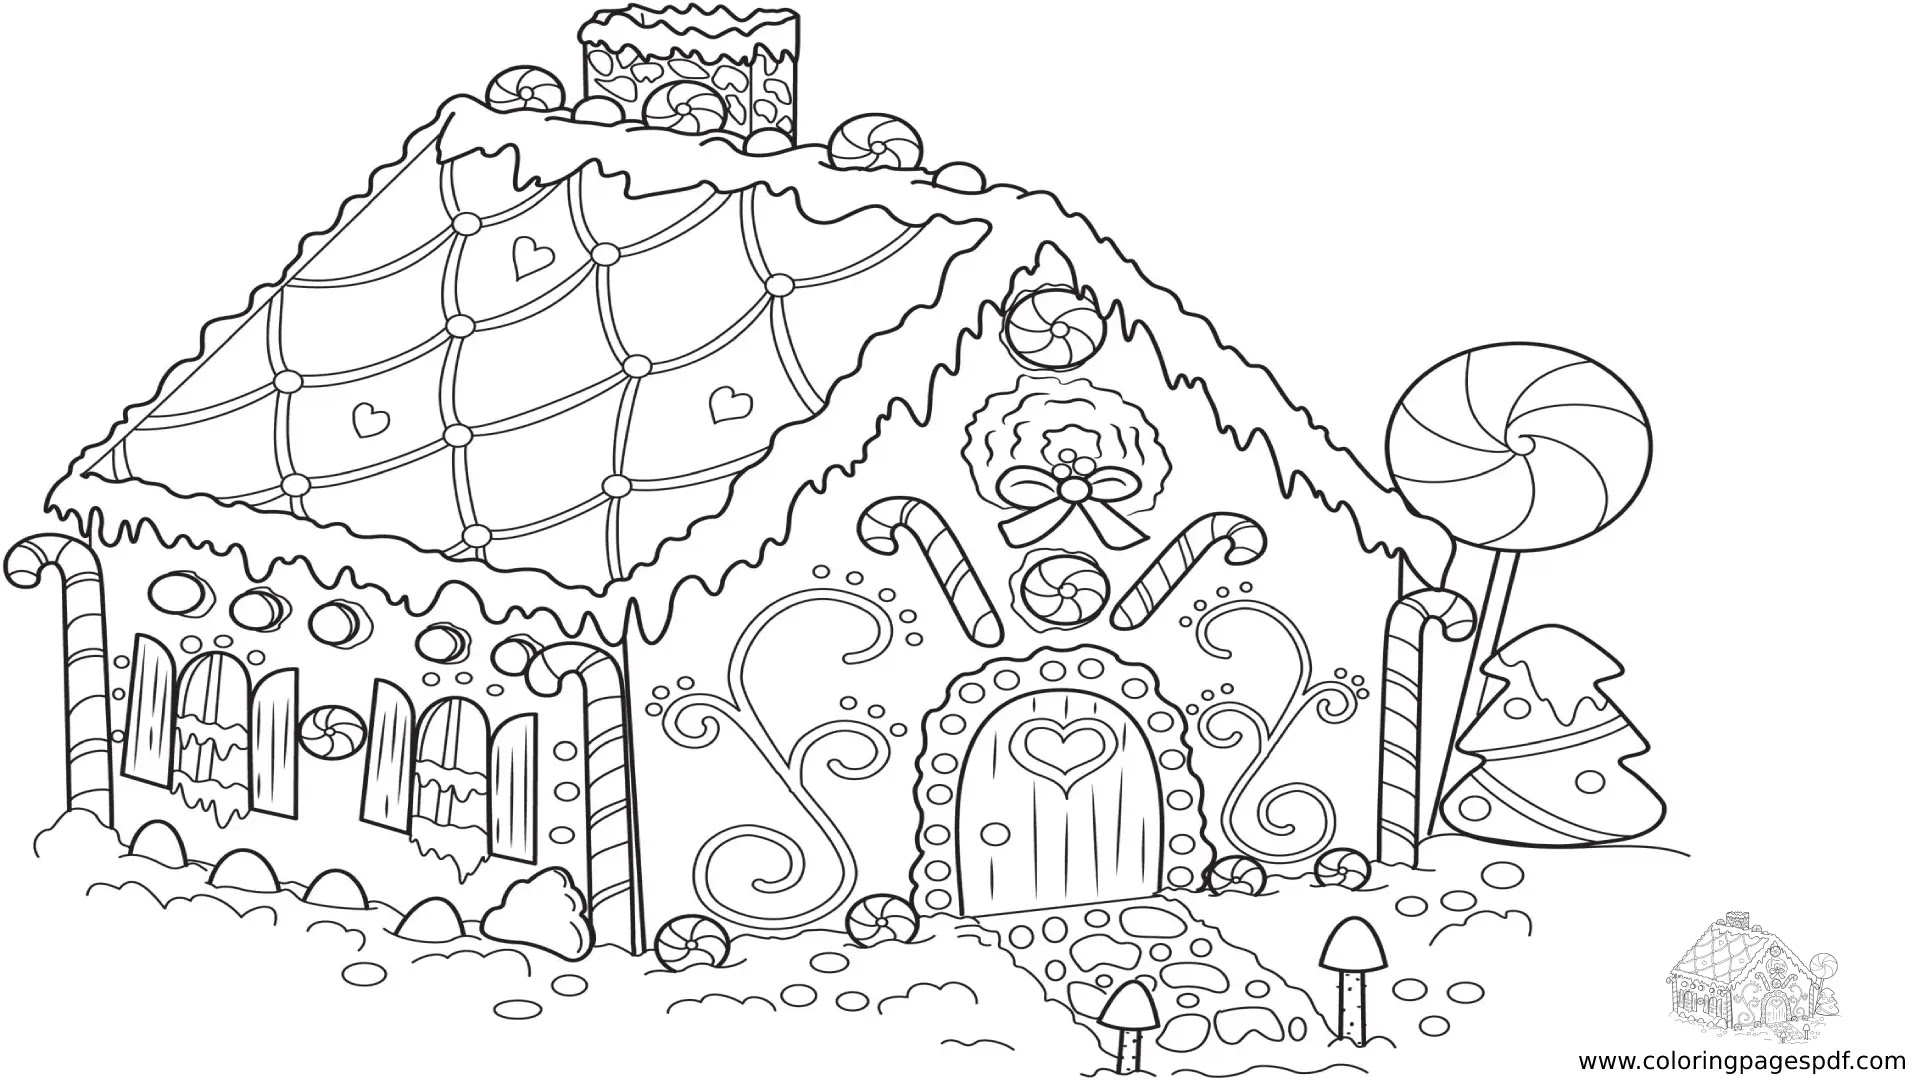 Coloring Page Of A Candy House